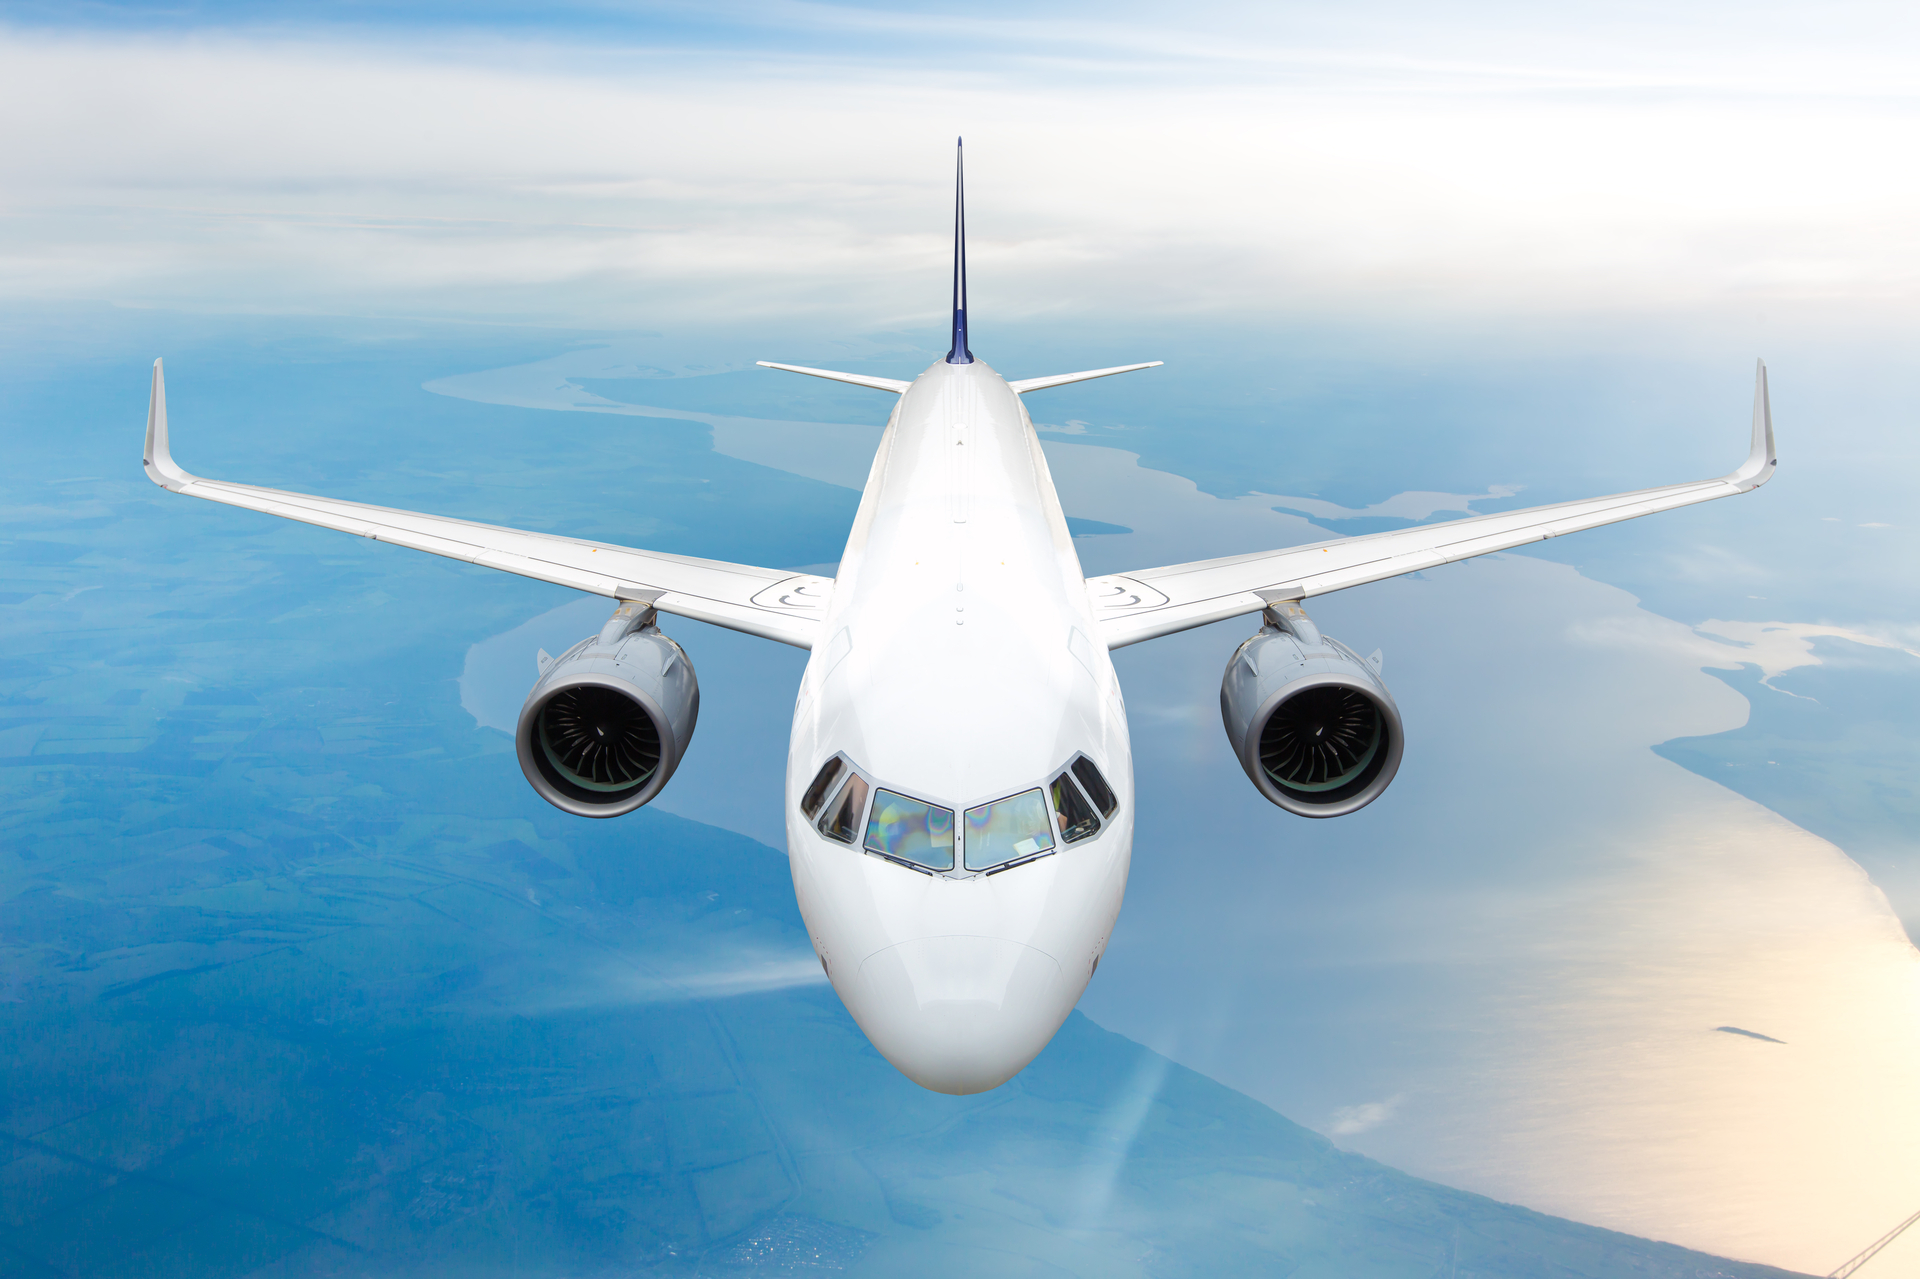 New regulatory initiatives supporting Sustainable Aviation Fuel